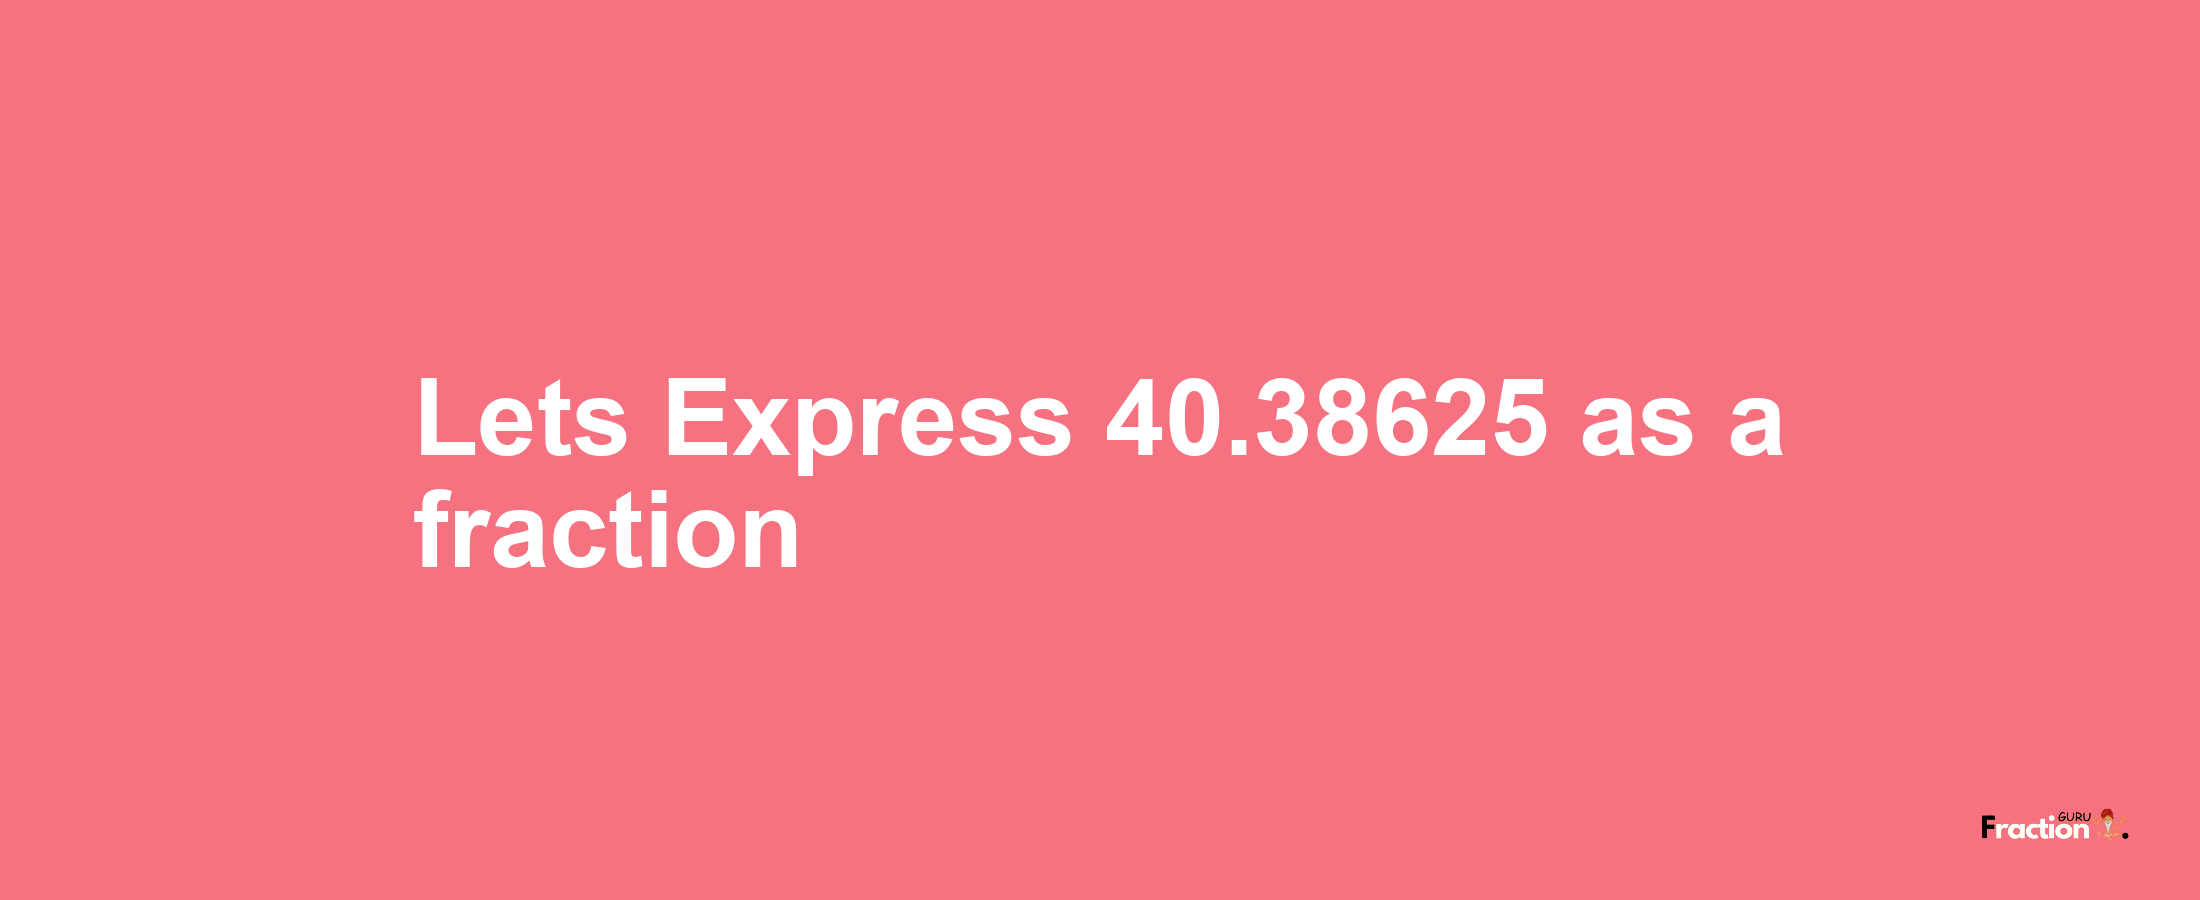 Lets Express 40.38625 as afraction